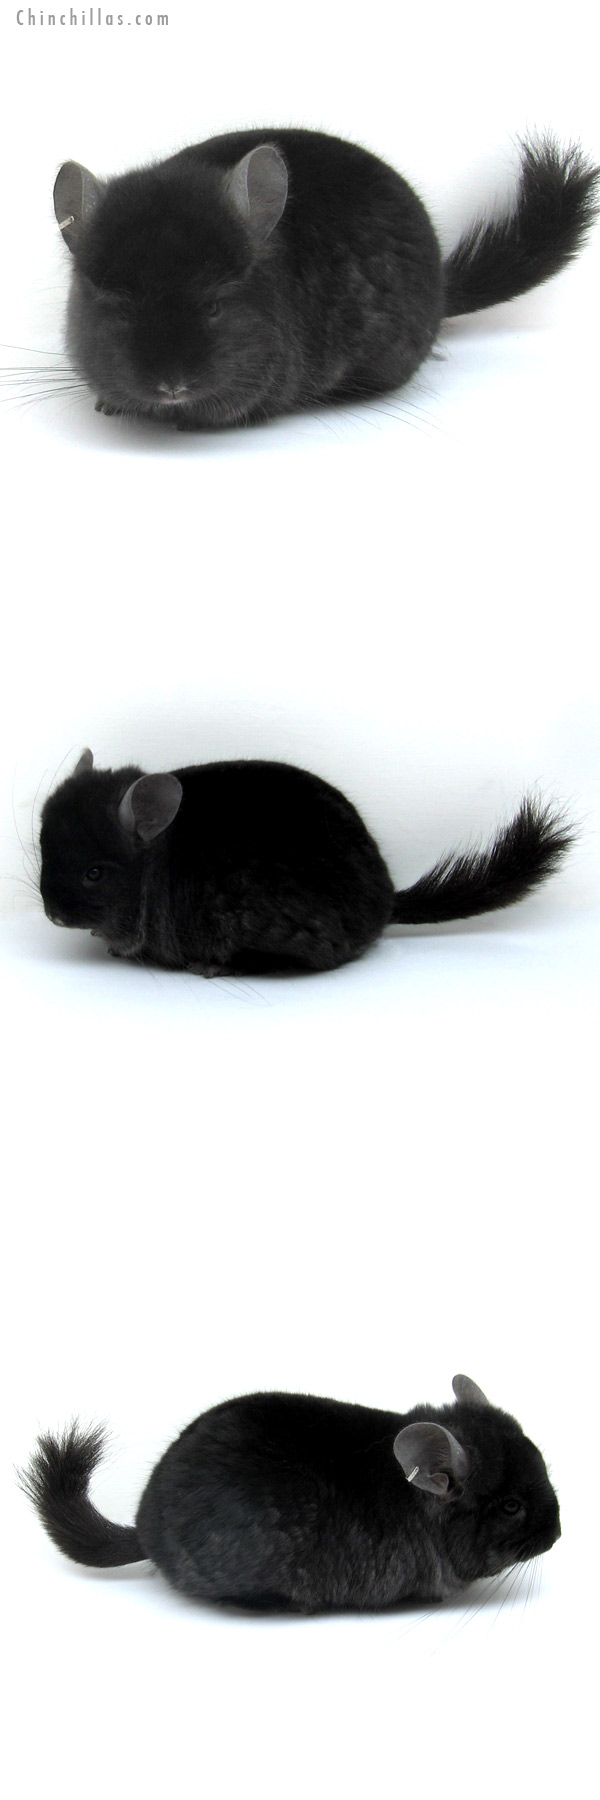 Chinchilla or related item offered for sale or export on Chinchillas.com - 12285 Exceedingly Rare Ebony Royal Persian Angora Male Chinchilla